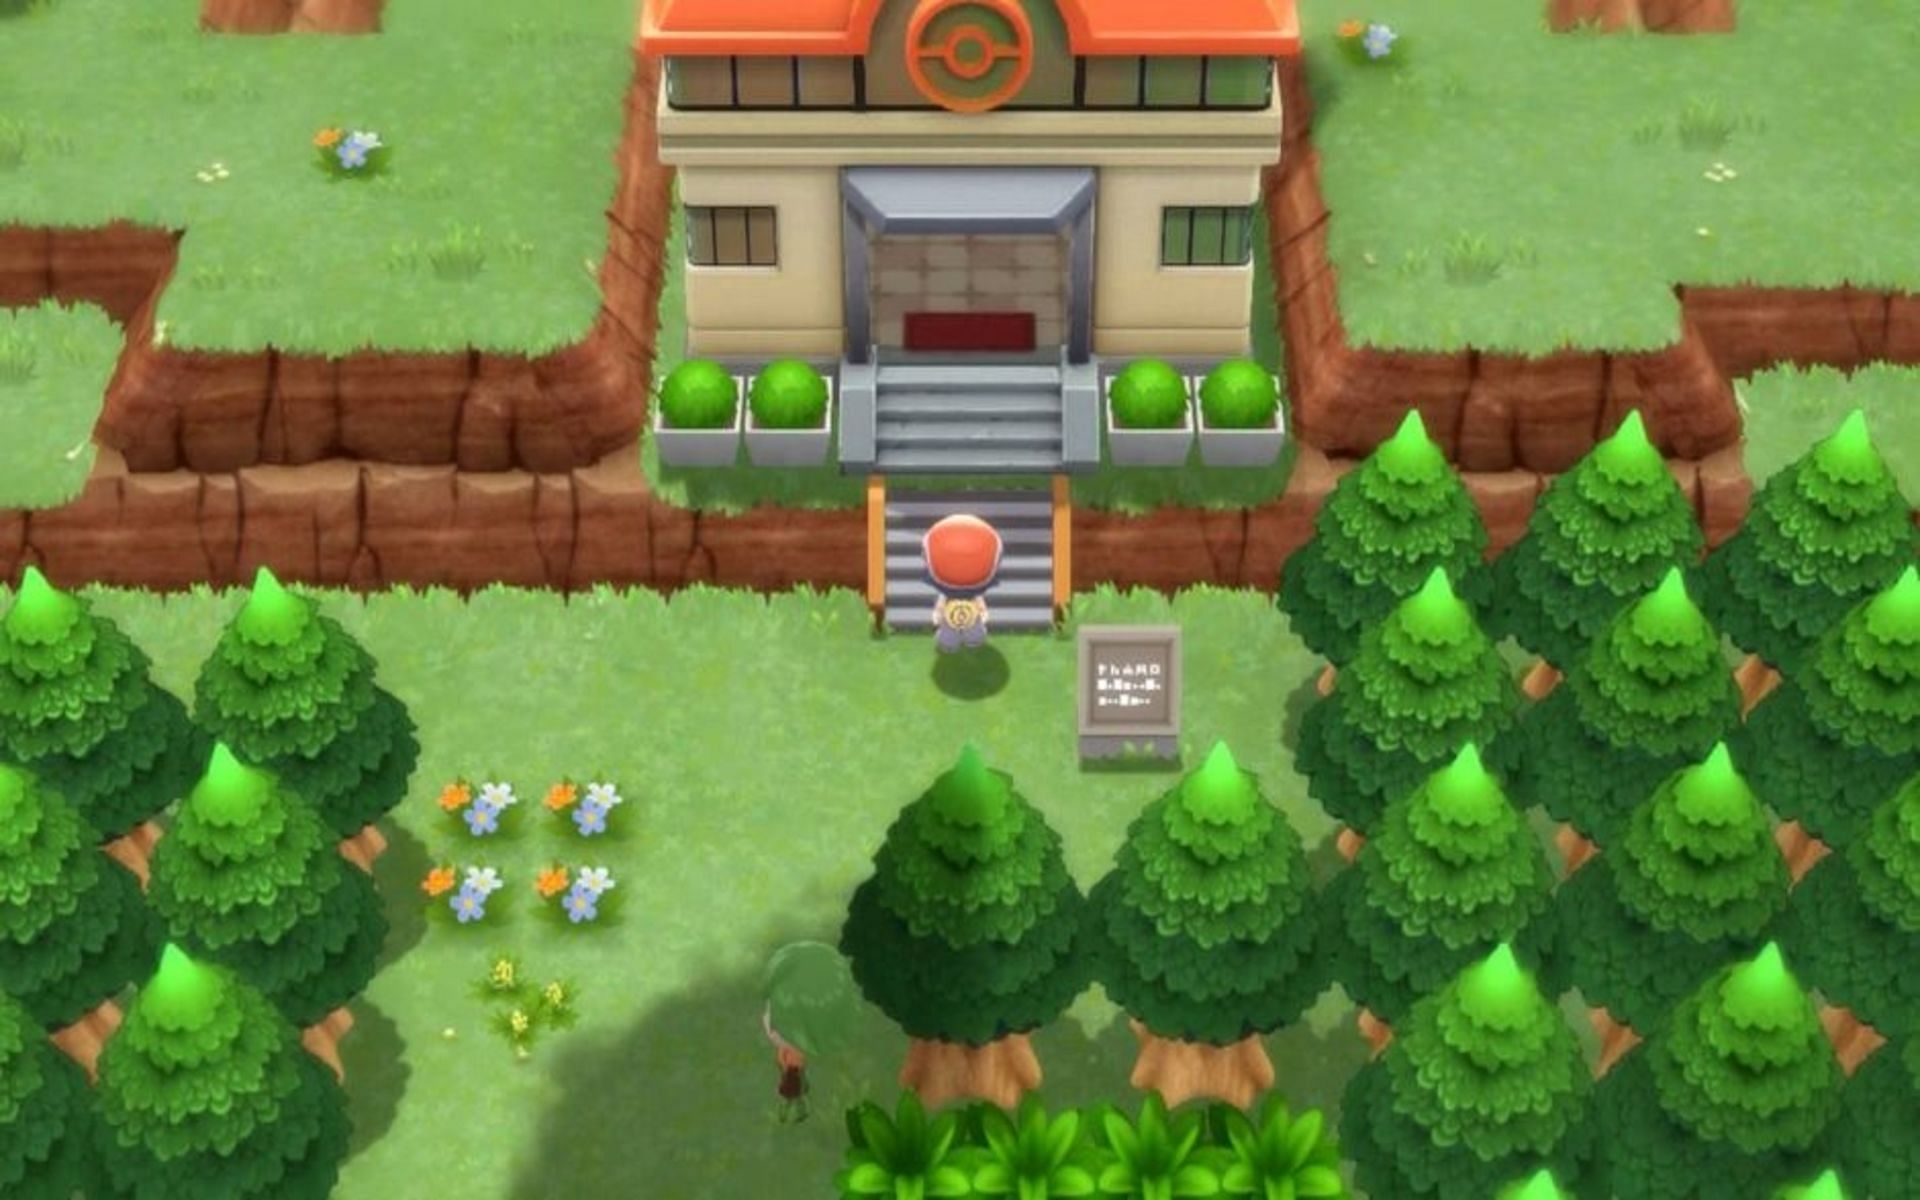 The entrance to Ramanas Park ressembles the Pal Park from the origional games (Image via The Pokemon Company)